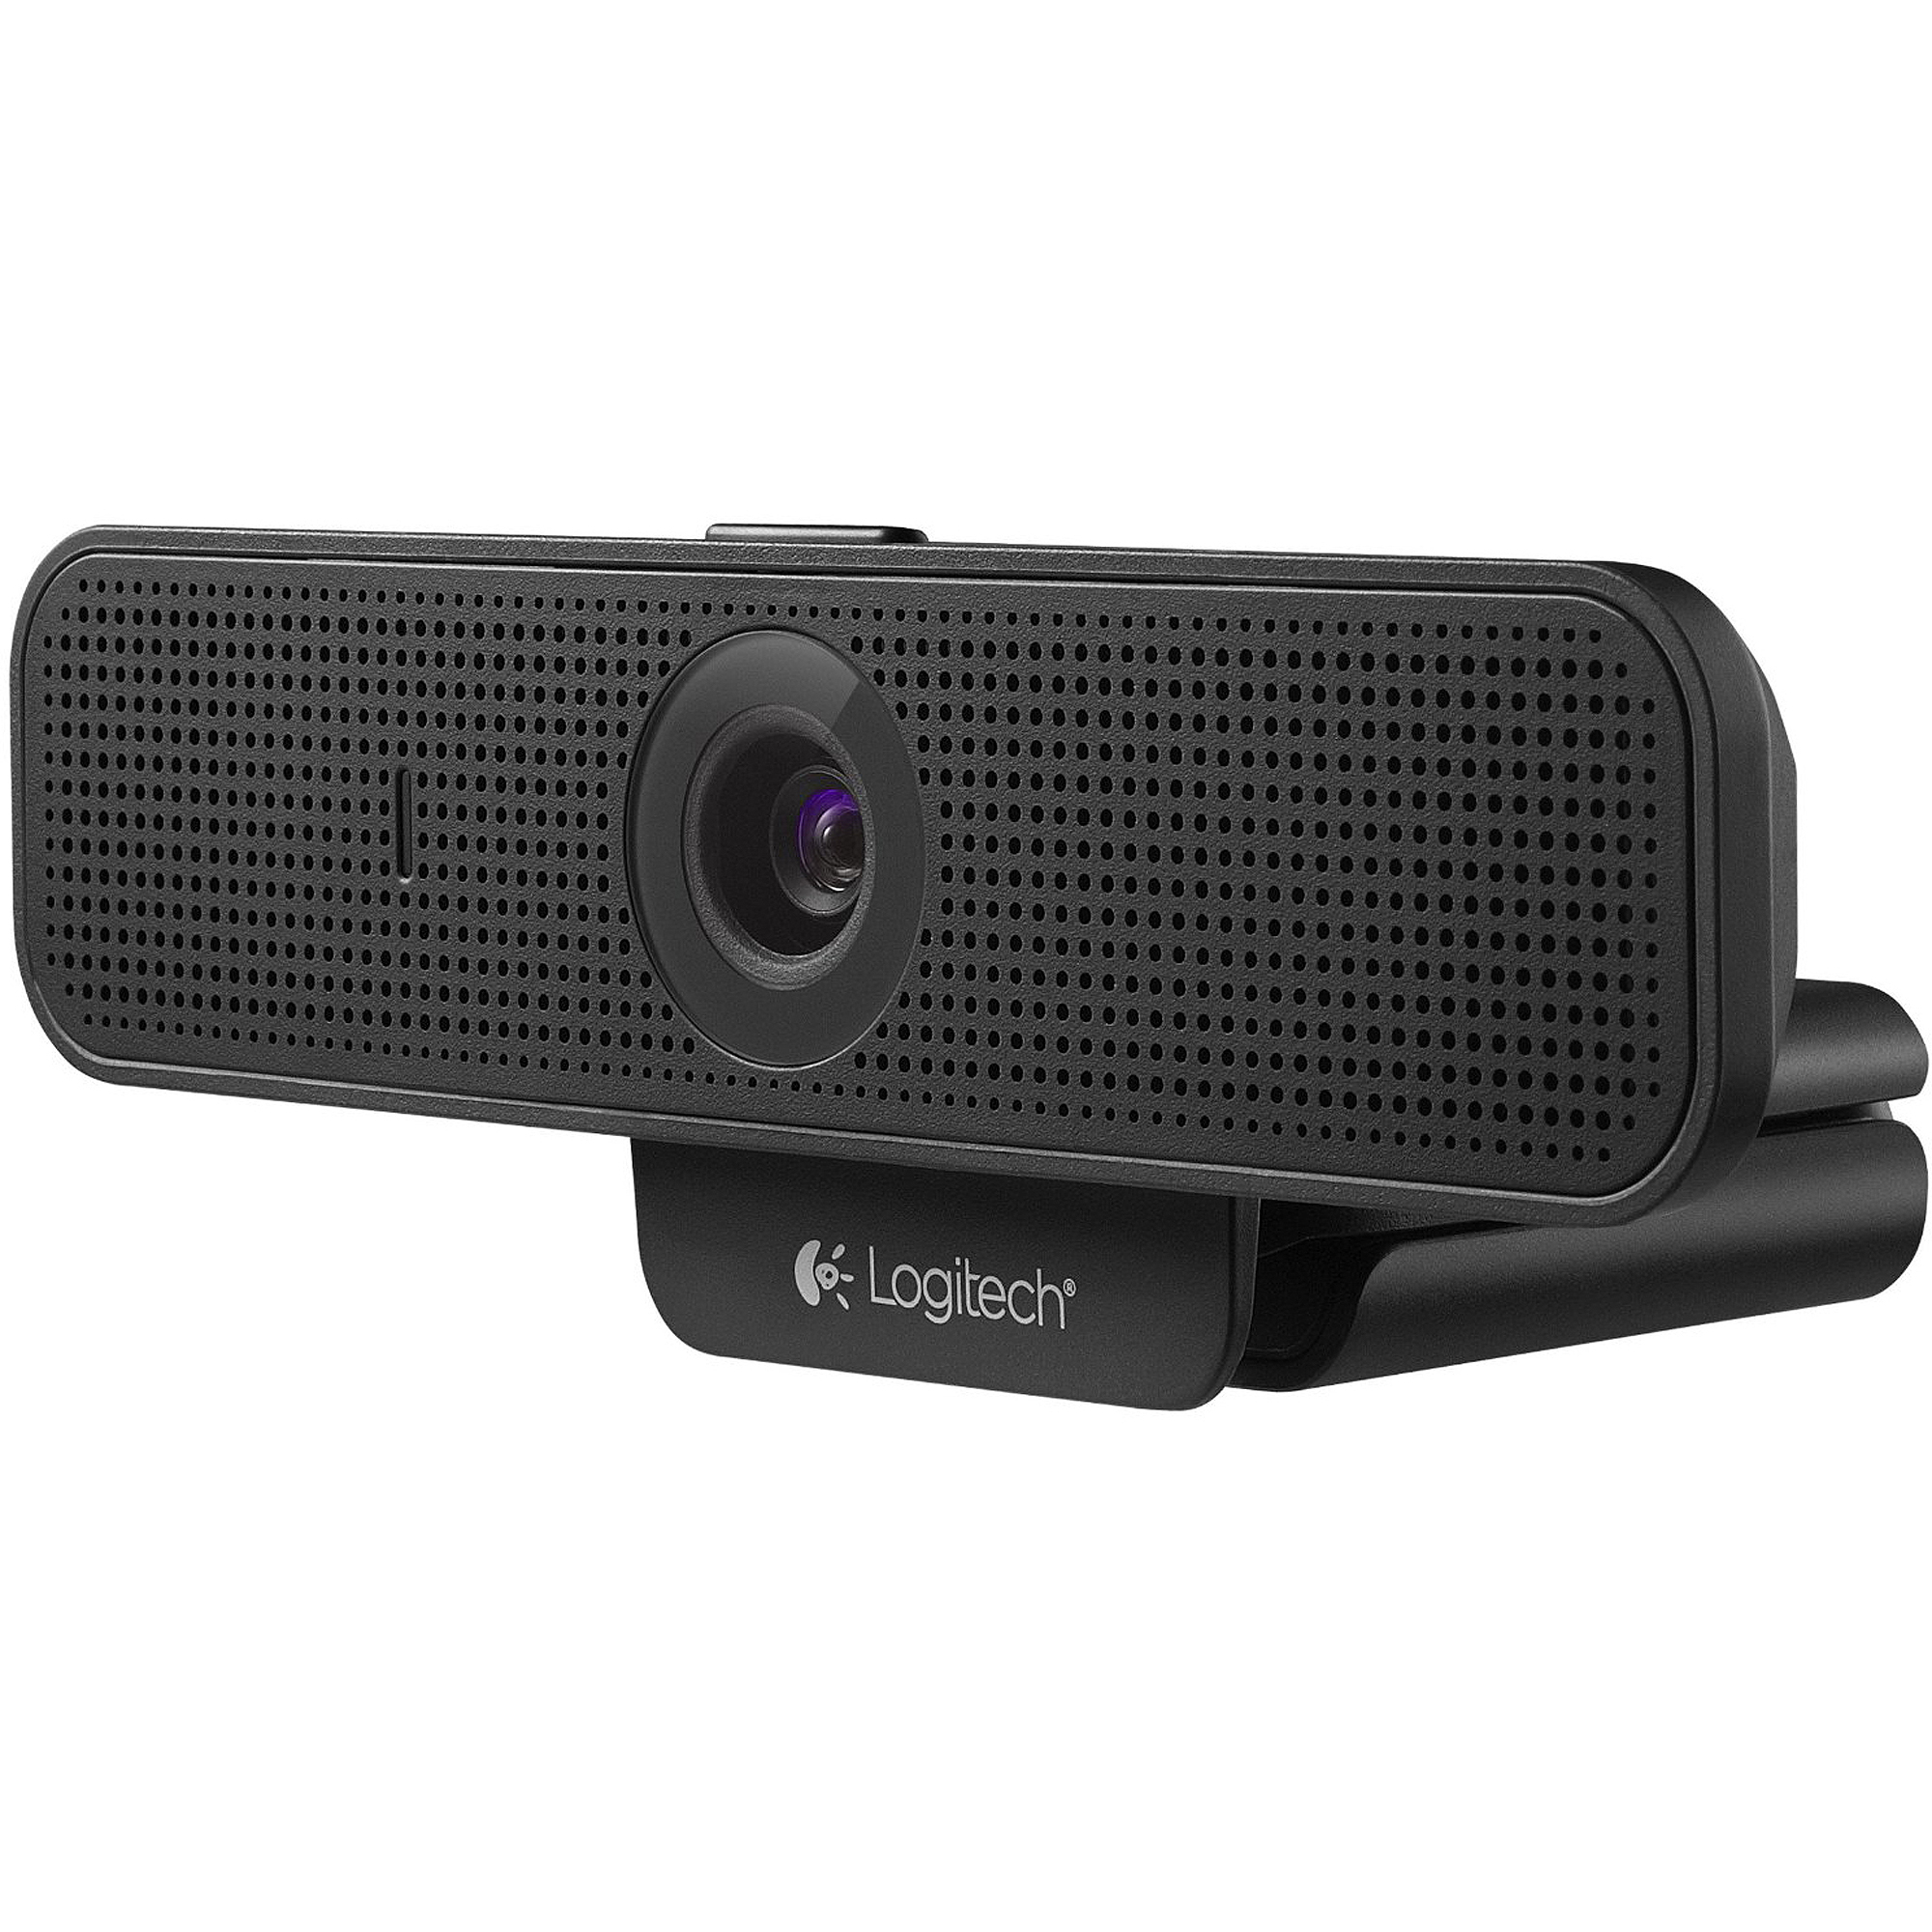 Drivers For Logitech C920 For Mac